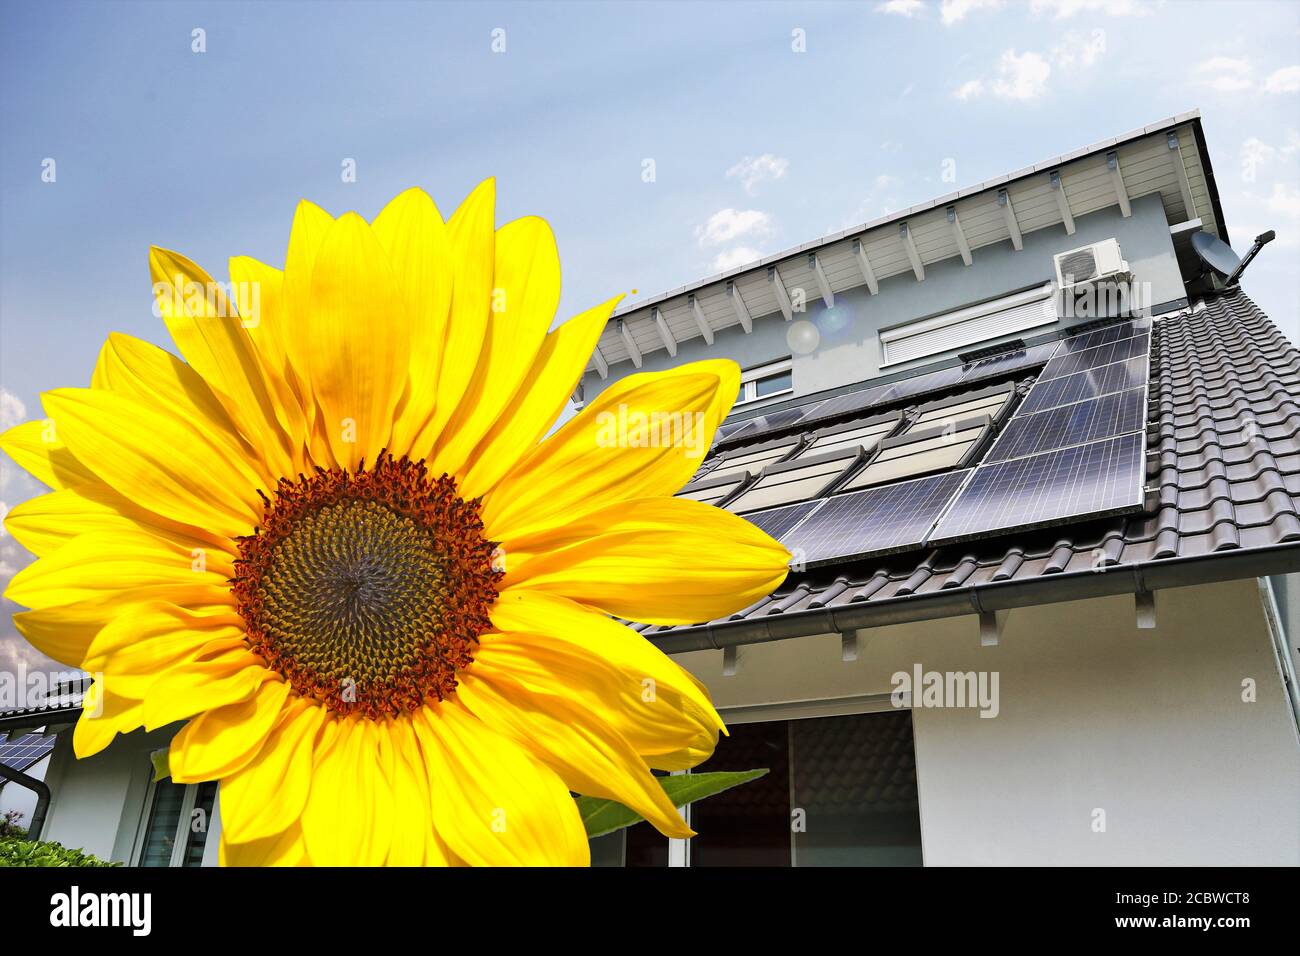 Solar roof (photovoltaics)with sunflower in the foreground Stock Photo